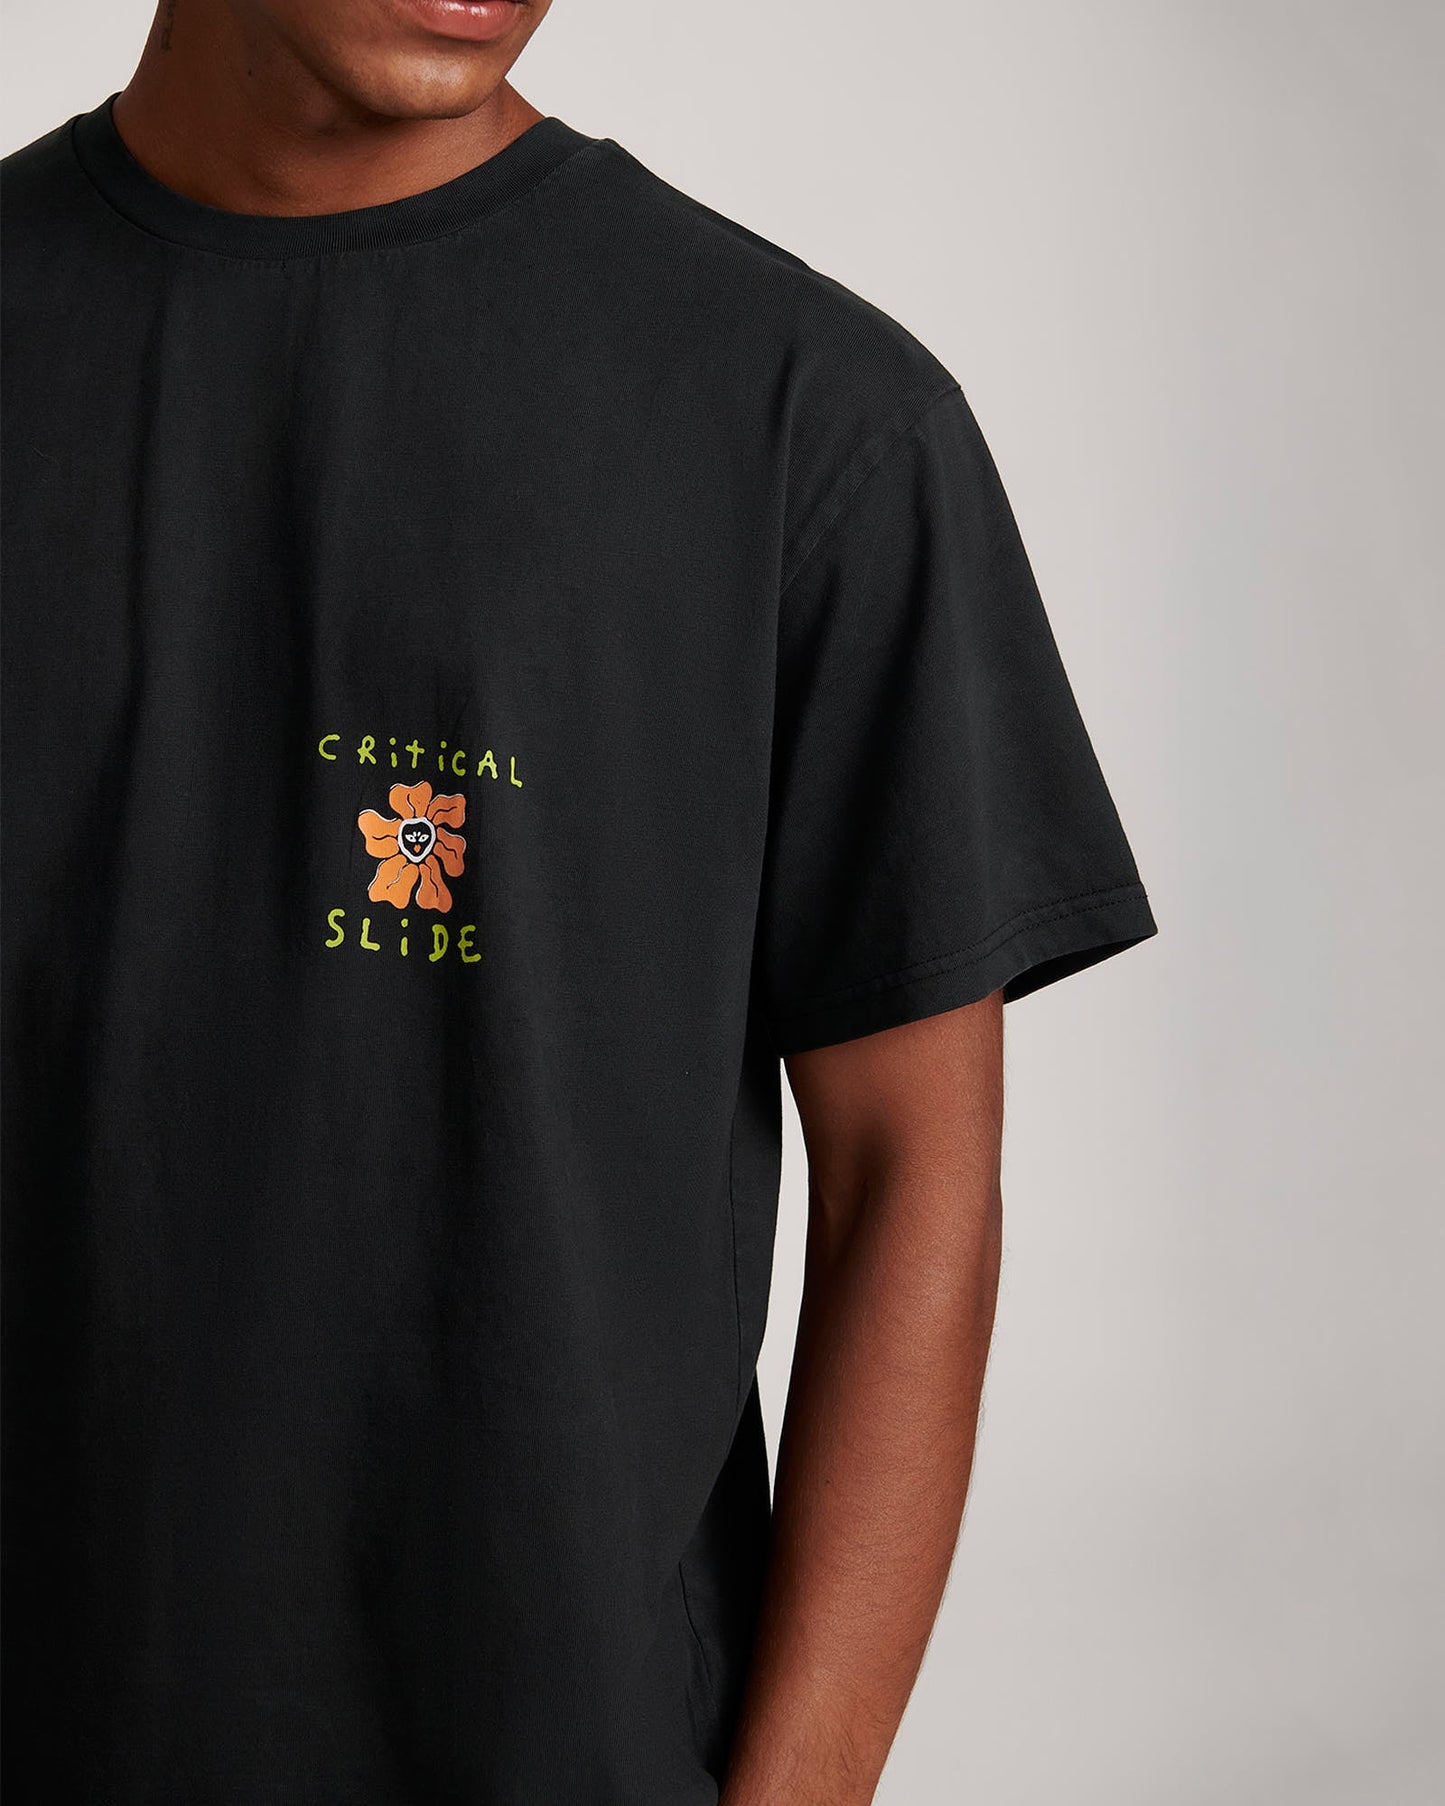 THE CRITICAL SLIDE SOCIETY - Groupies Tee - VINTAGE BLACK